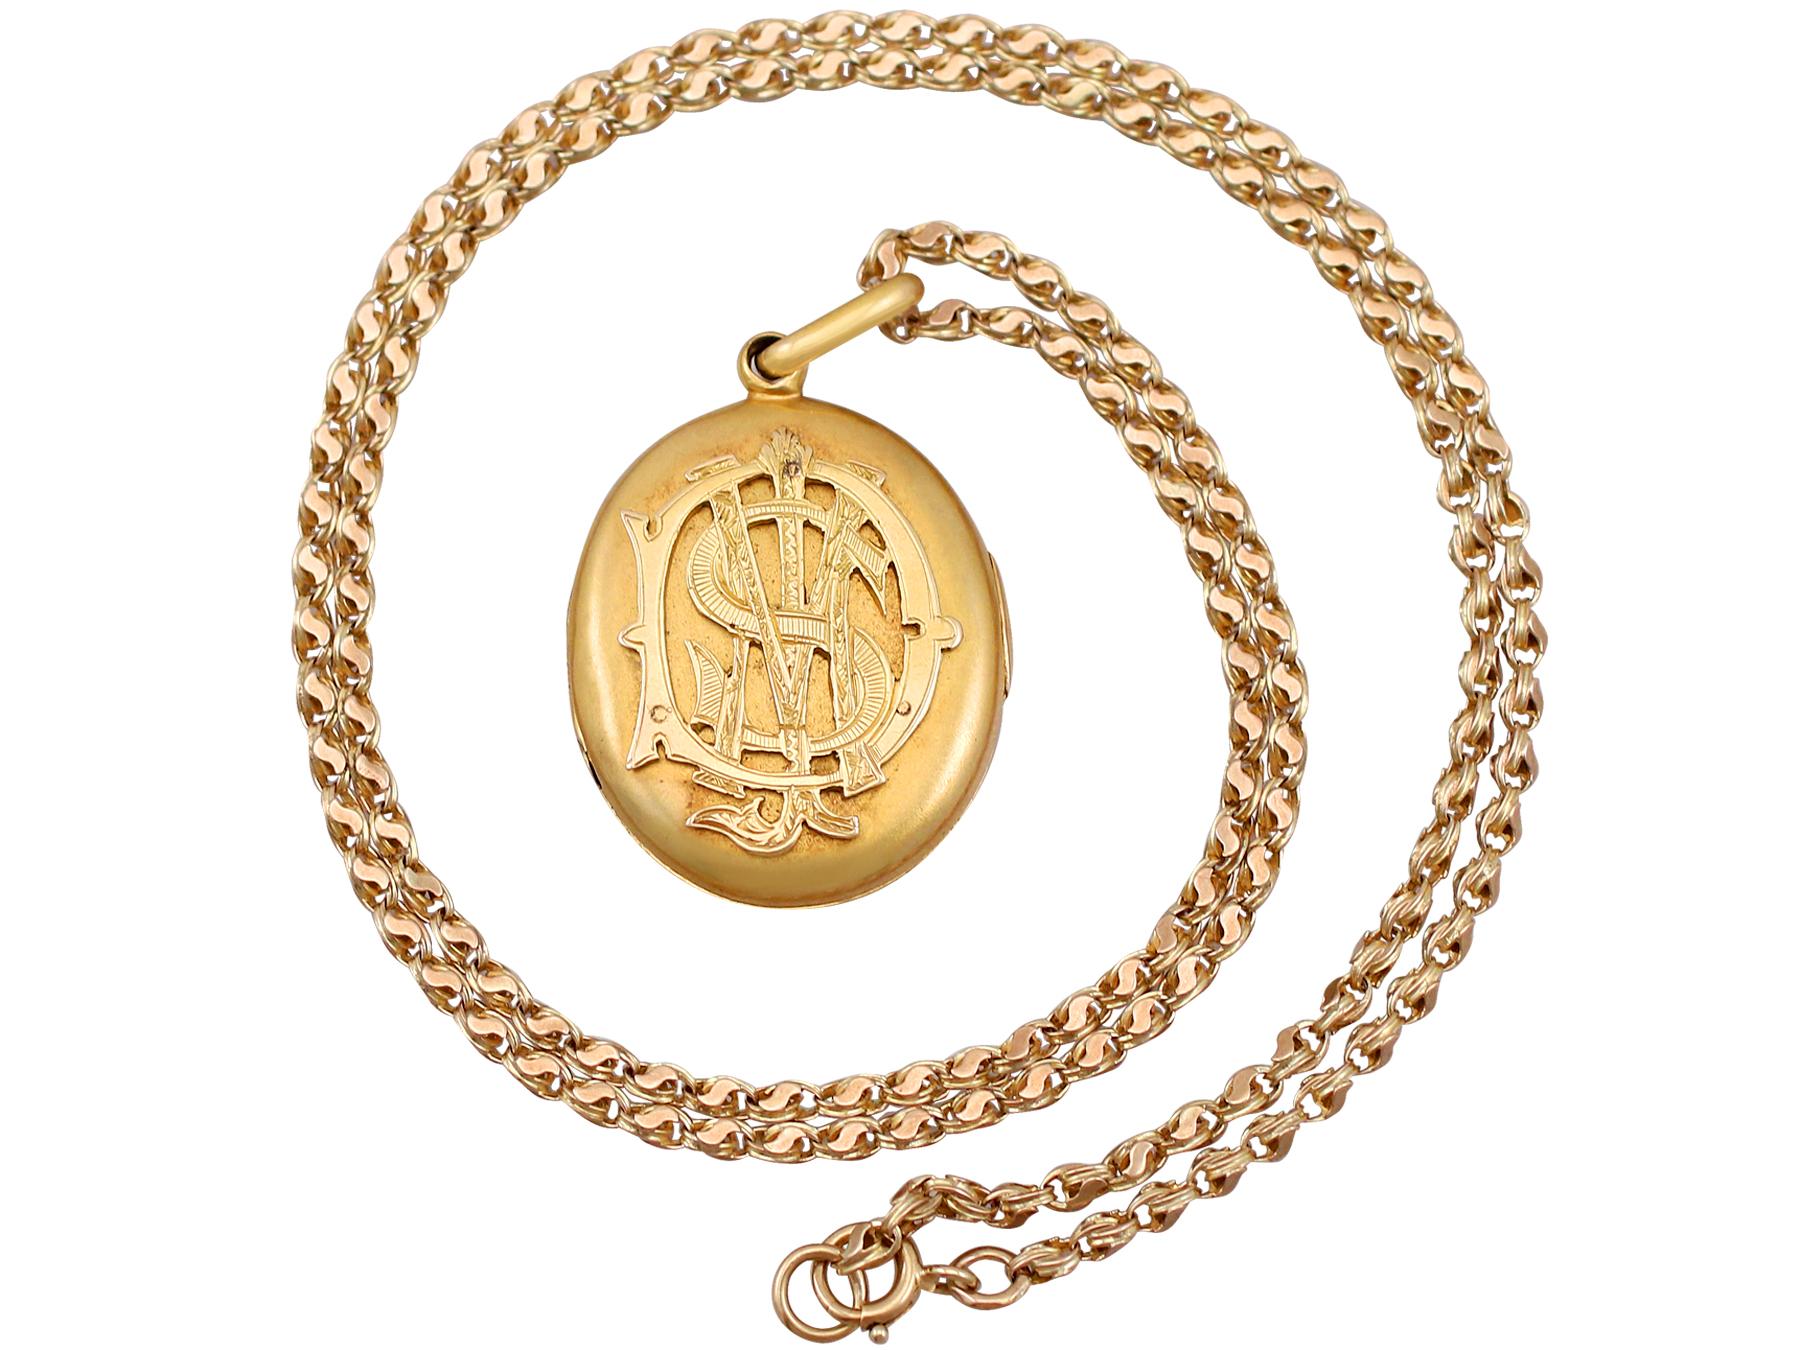 An impressive antique Victorian 15 karat yellow gold locket with 9 karat yellow gold chain; part of our diverse antique jewelry and estate jewelry collections.

This fine and impressive antique gold locket has been crafted in 15k yellow gold.

The